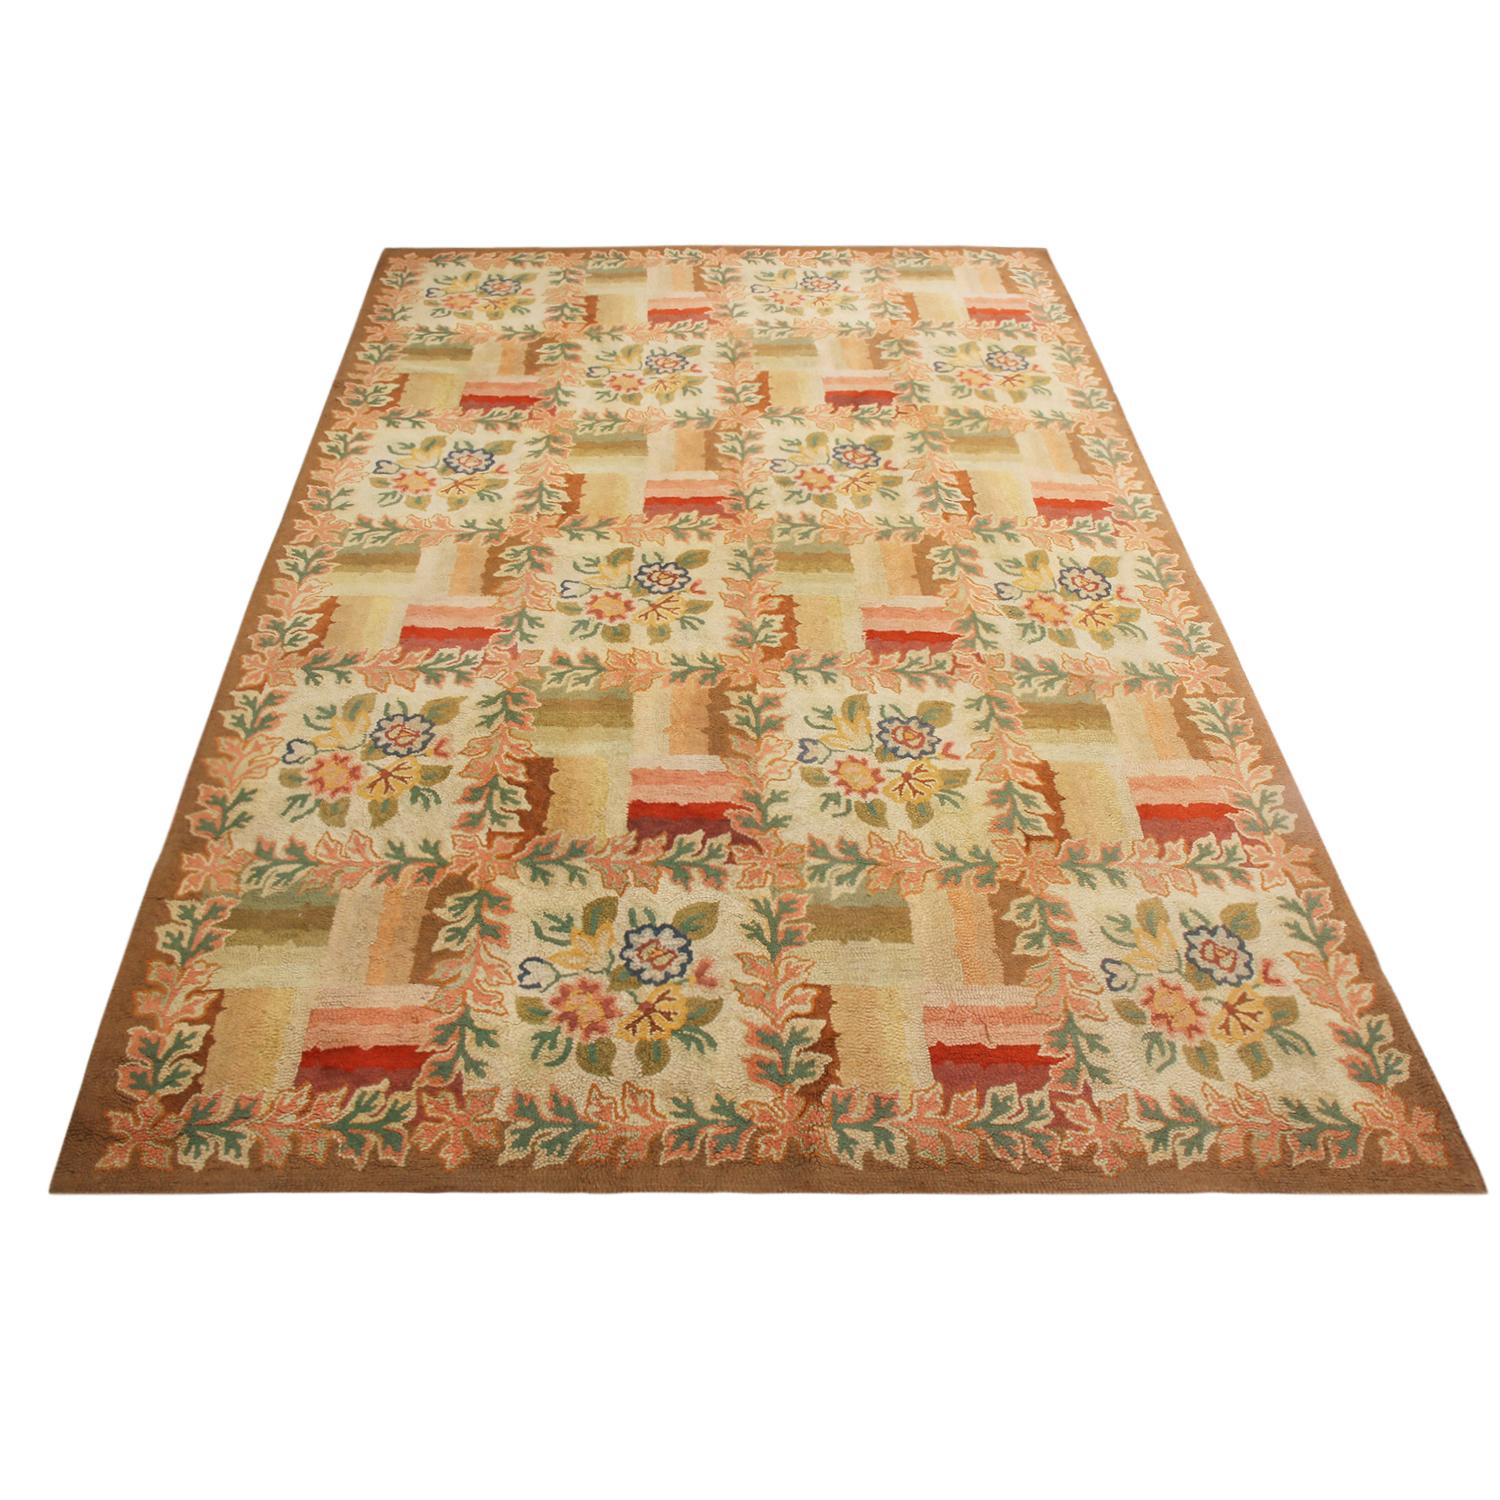 Originating from the United States in the 1950s, this vintage floral rug hails from a premier collection of hand hooked wool carpets, standing out for its use of rich and varied colorways and its sharp, lasting detail in pristine condition. The